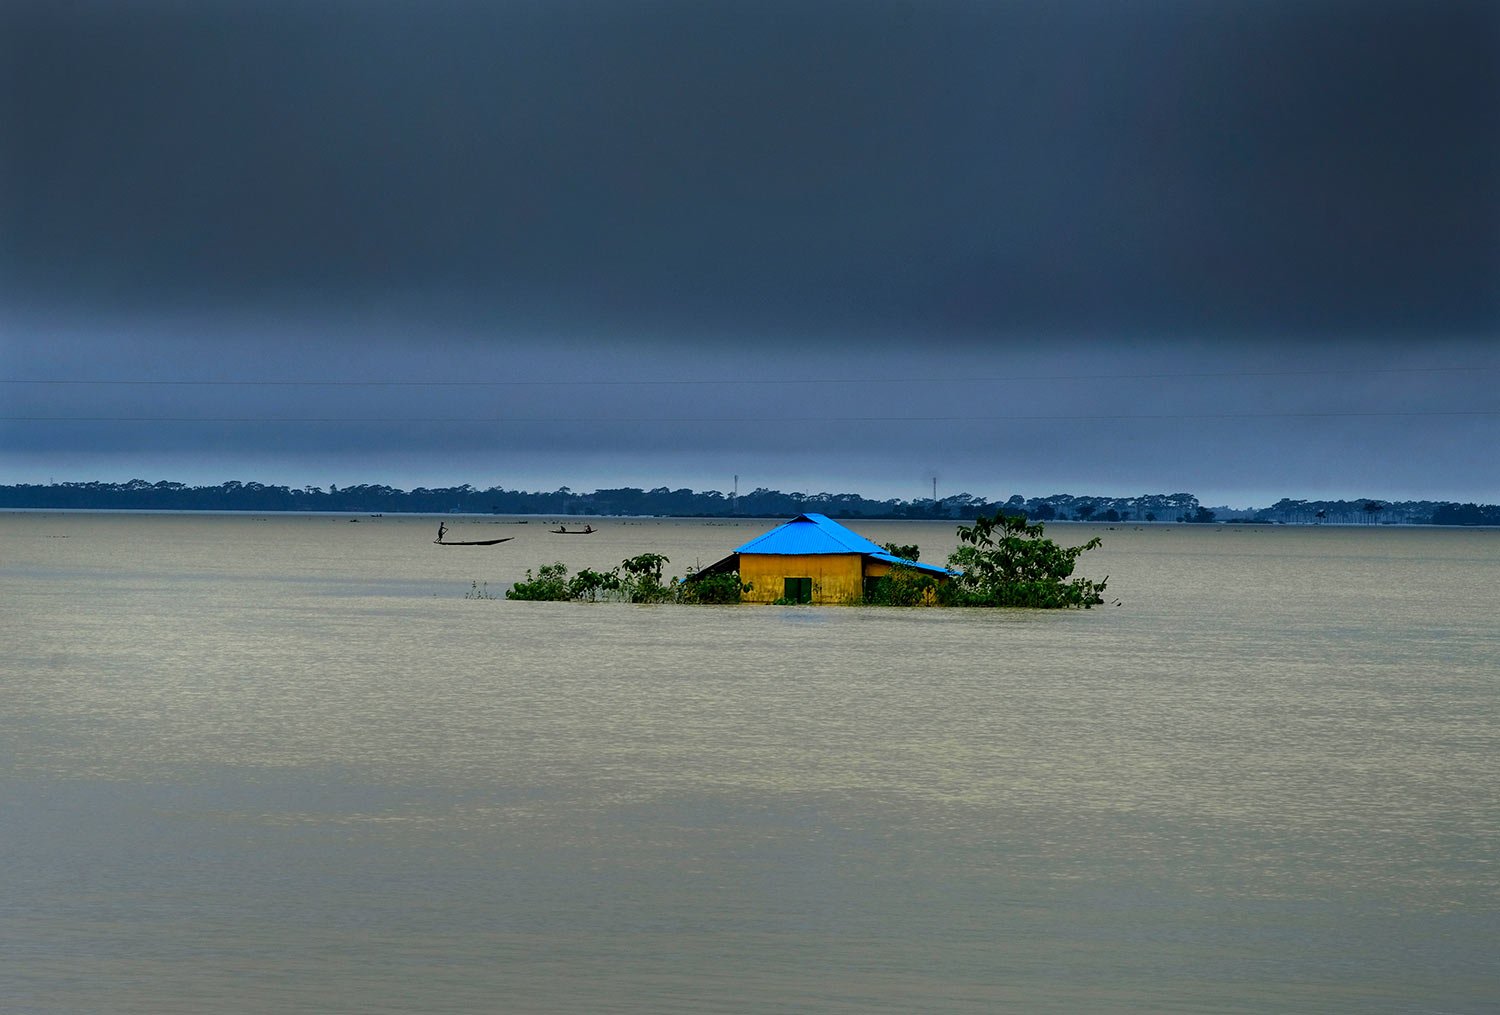  A house in marooned by flood waters in Sylhet, Bangladesh, Monday, June 20, 2022. (AP Photo/Mahmud Hossain Opu) 